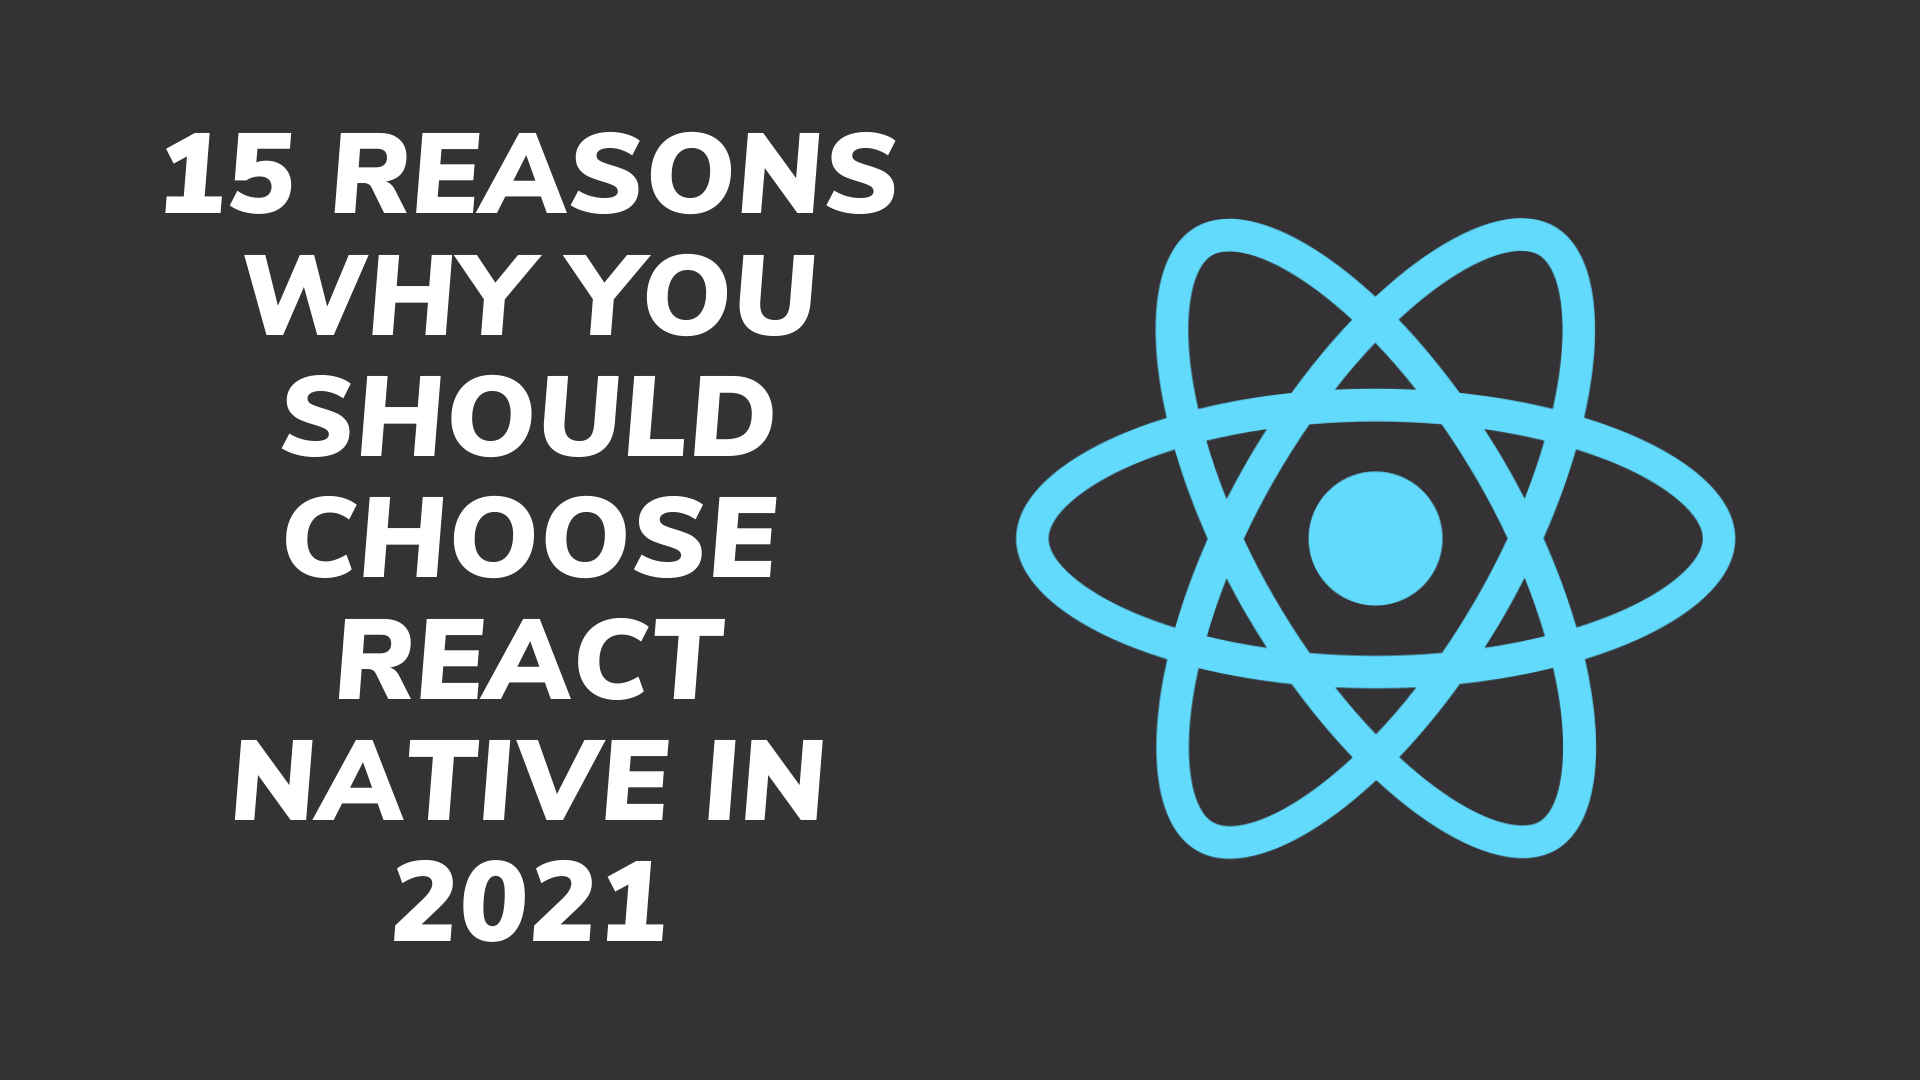 15 Reasons Why You Should Choose React Native In 2021